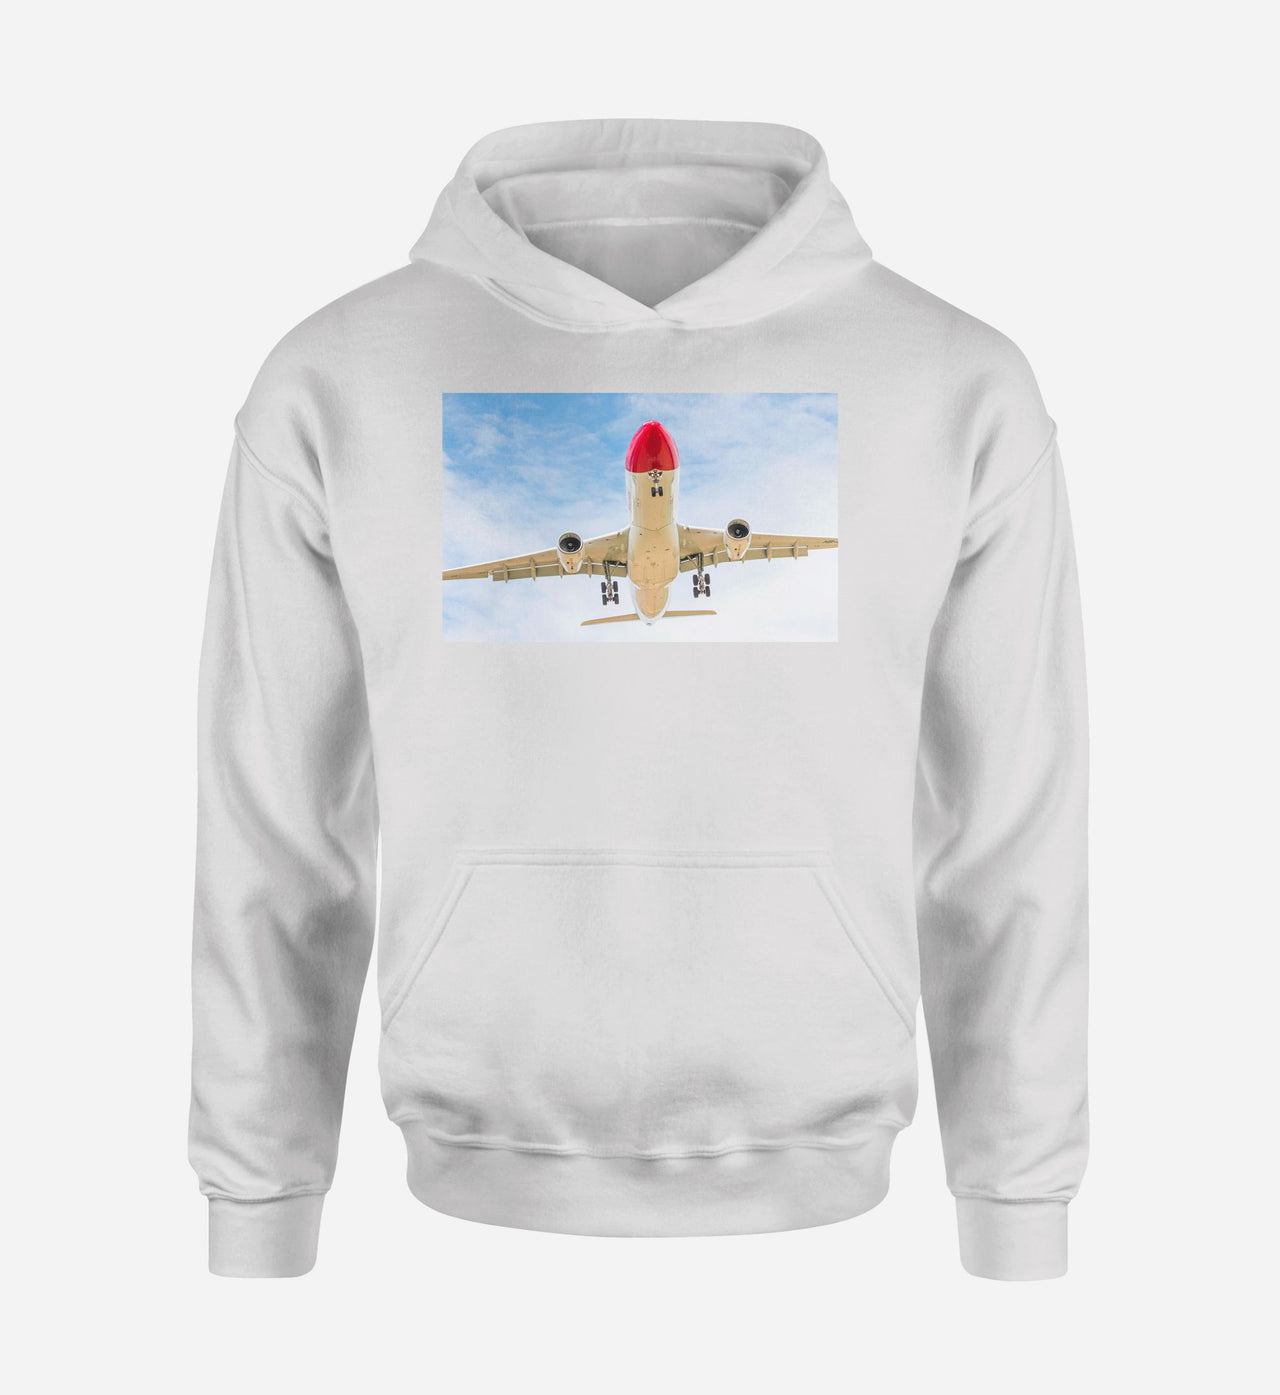 Beautiful Airbus A330 on Approach Designed Hoodies